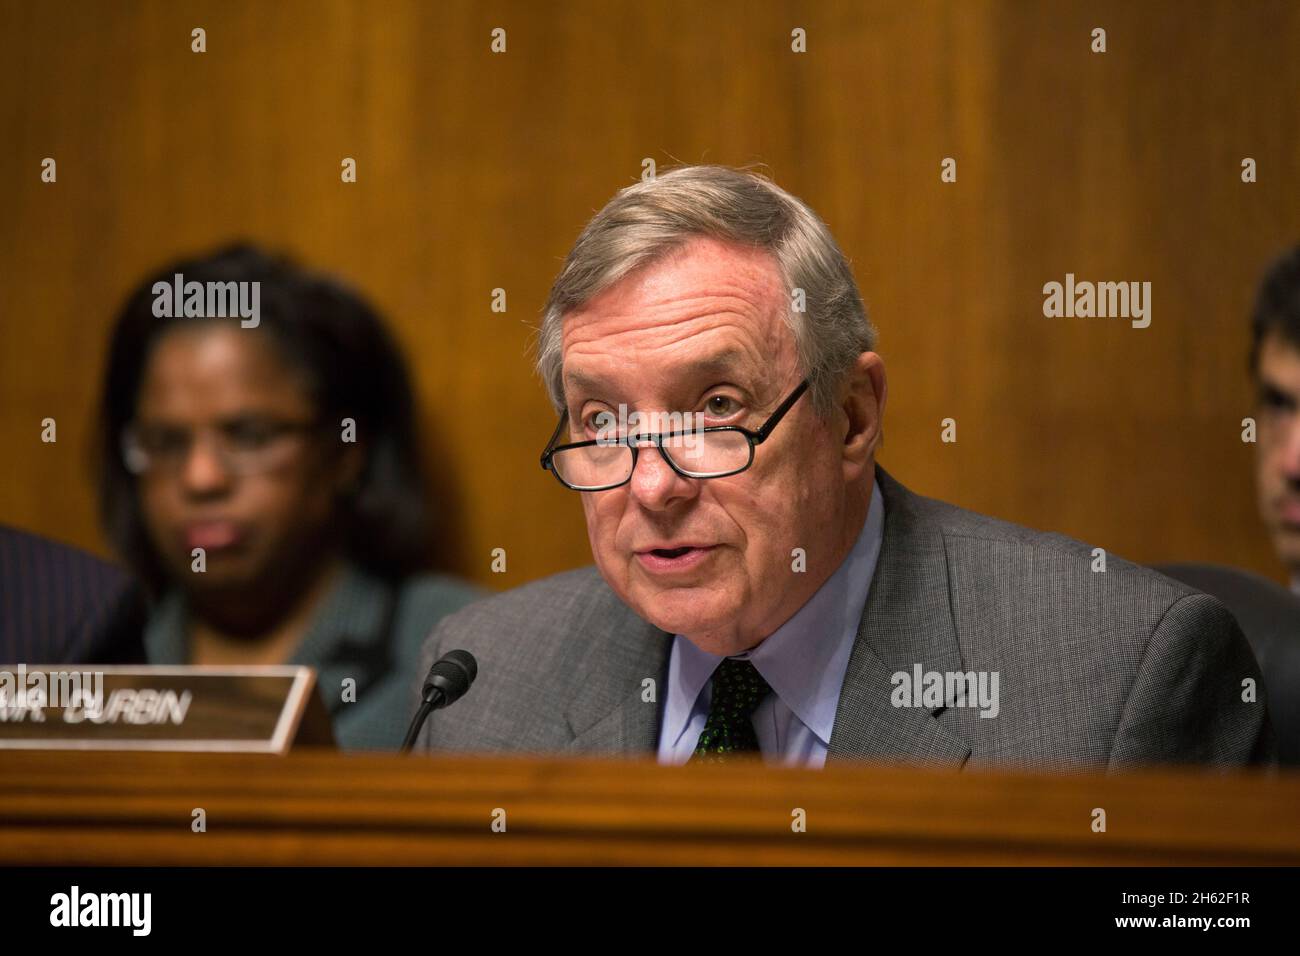 Senator Richard Durbin asks U.S. Customs and Border Protection Acting Deputy Commissioner Ronald D. Vitiello questions during testimony before the Senate Judiciary Committee, Subcommittee on Border Security and Immigration, during a hearing entitled 'Building America's Trust through Border Security: Progress on the Southern Border' in Washington, D.C., May 23, 2017 Stock Photo